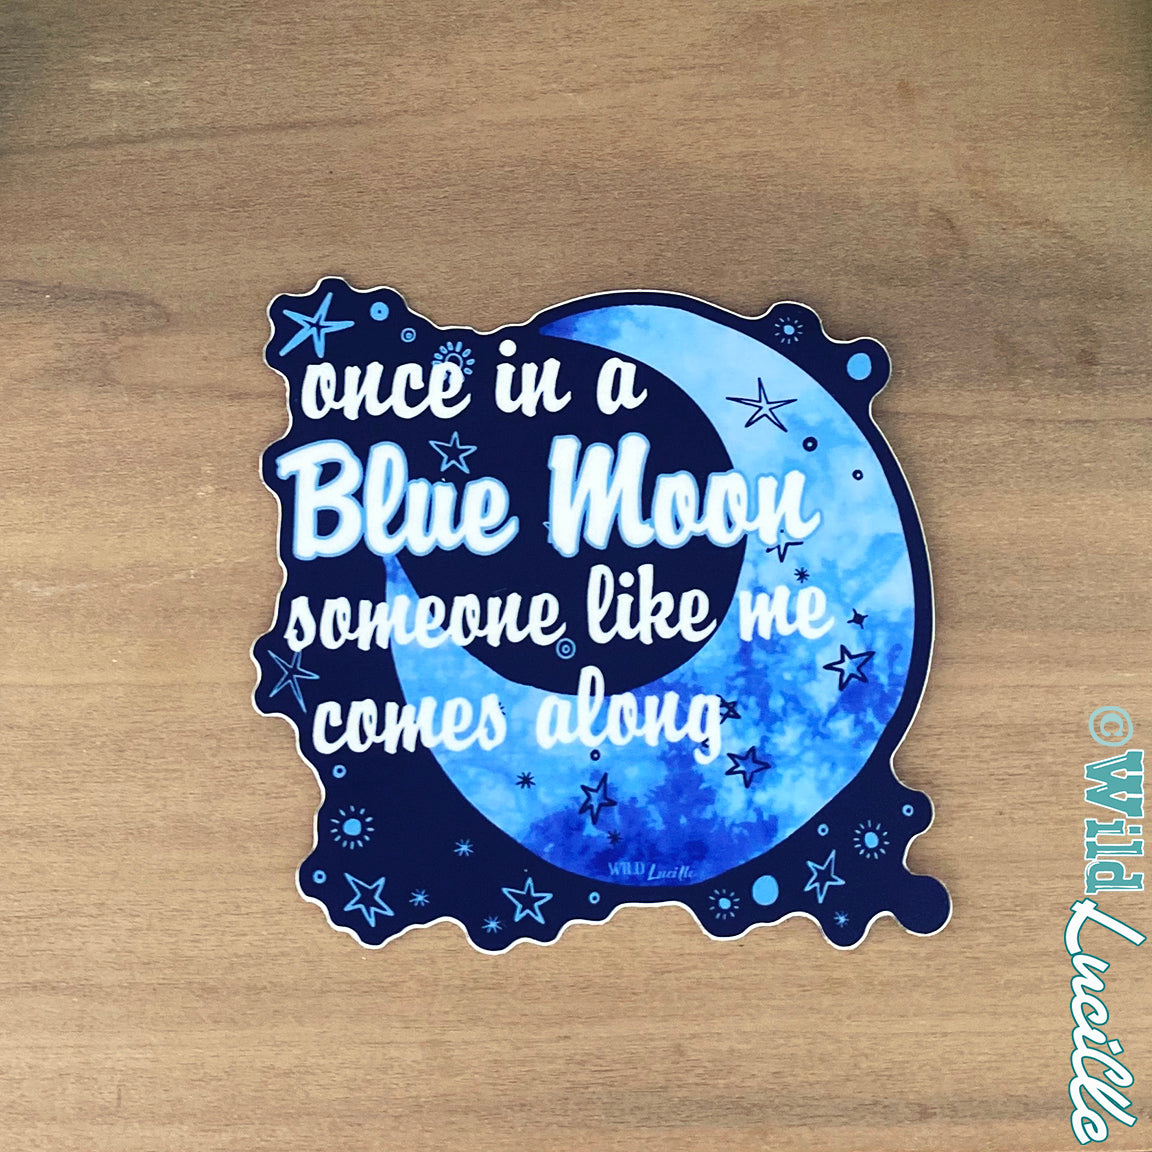 Once in a Blue Moon Someone Like Me Comes Along - Vinyl Sticker Decals